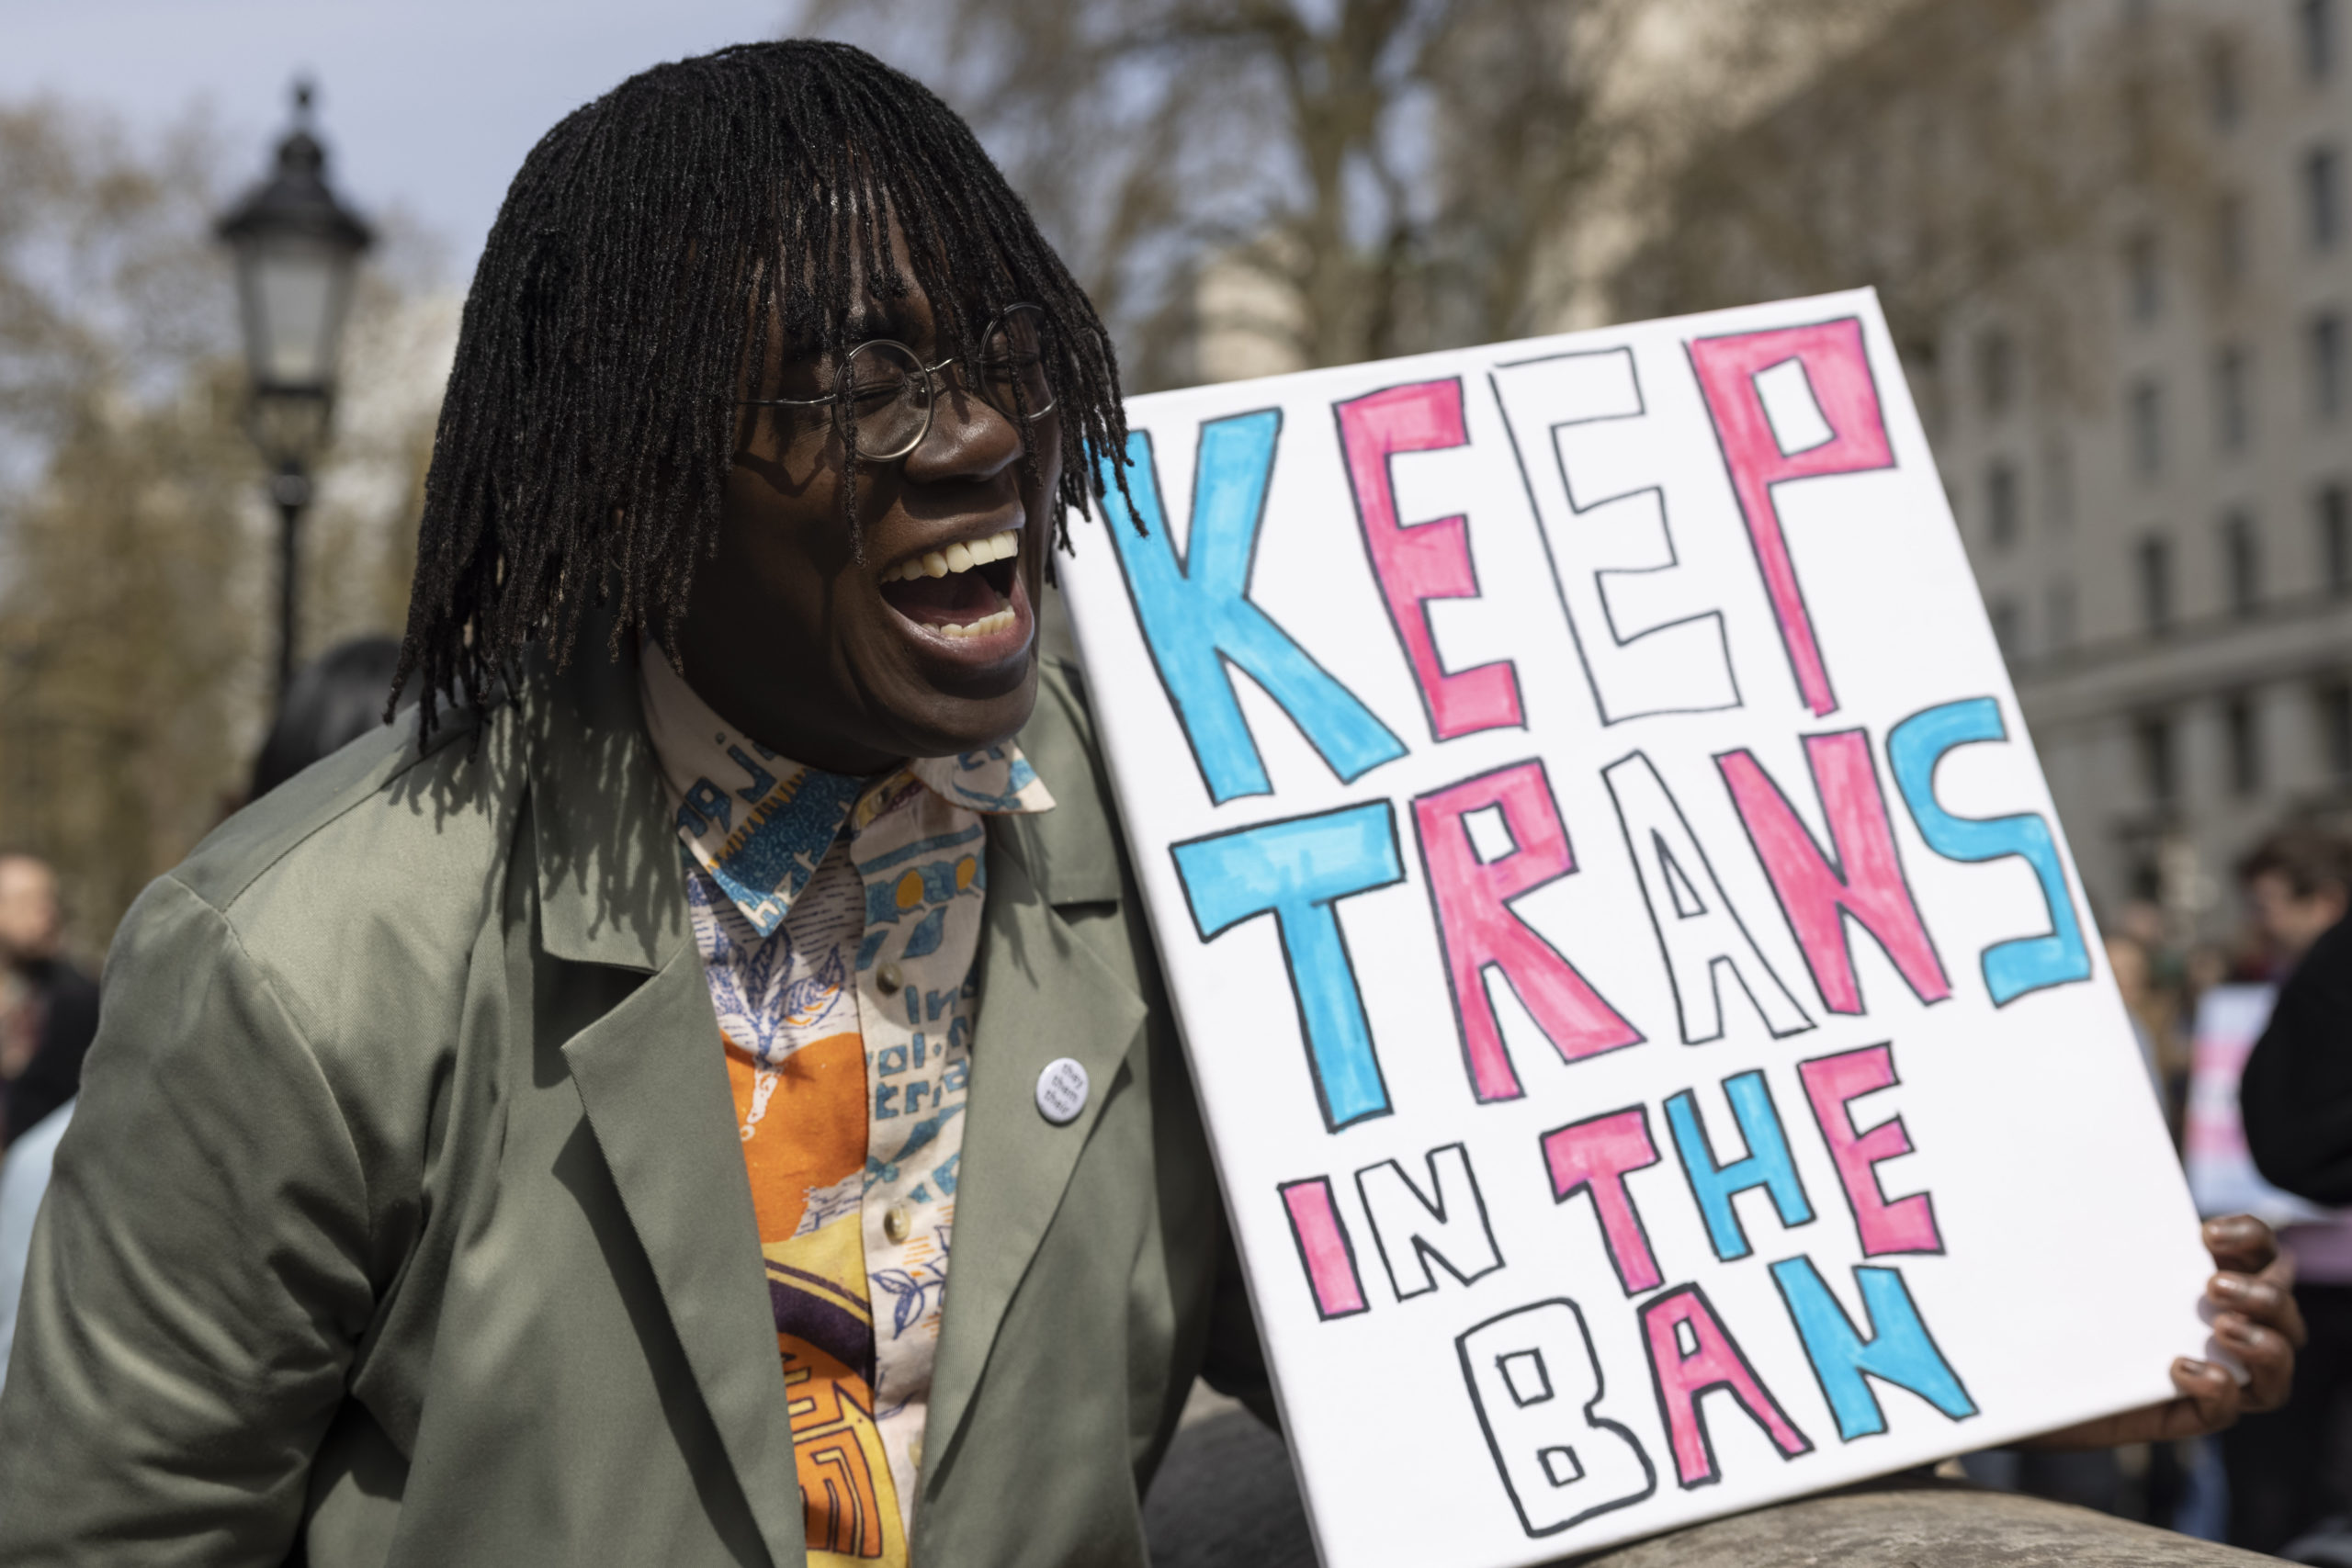 LONDON, ENGLAND - APRIL 10: A demonstrator holds a placard during the No Ban Without Trans protest opposite Downing Street on April 10, 2022 in London, England. (Photo by Hollie Adams/Getty Images)